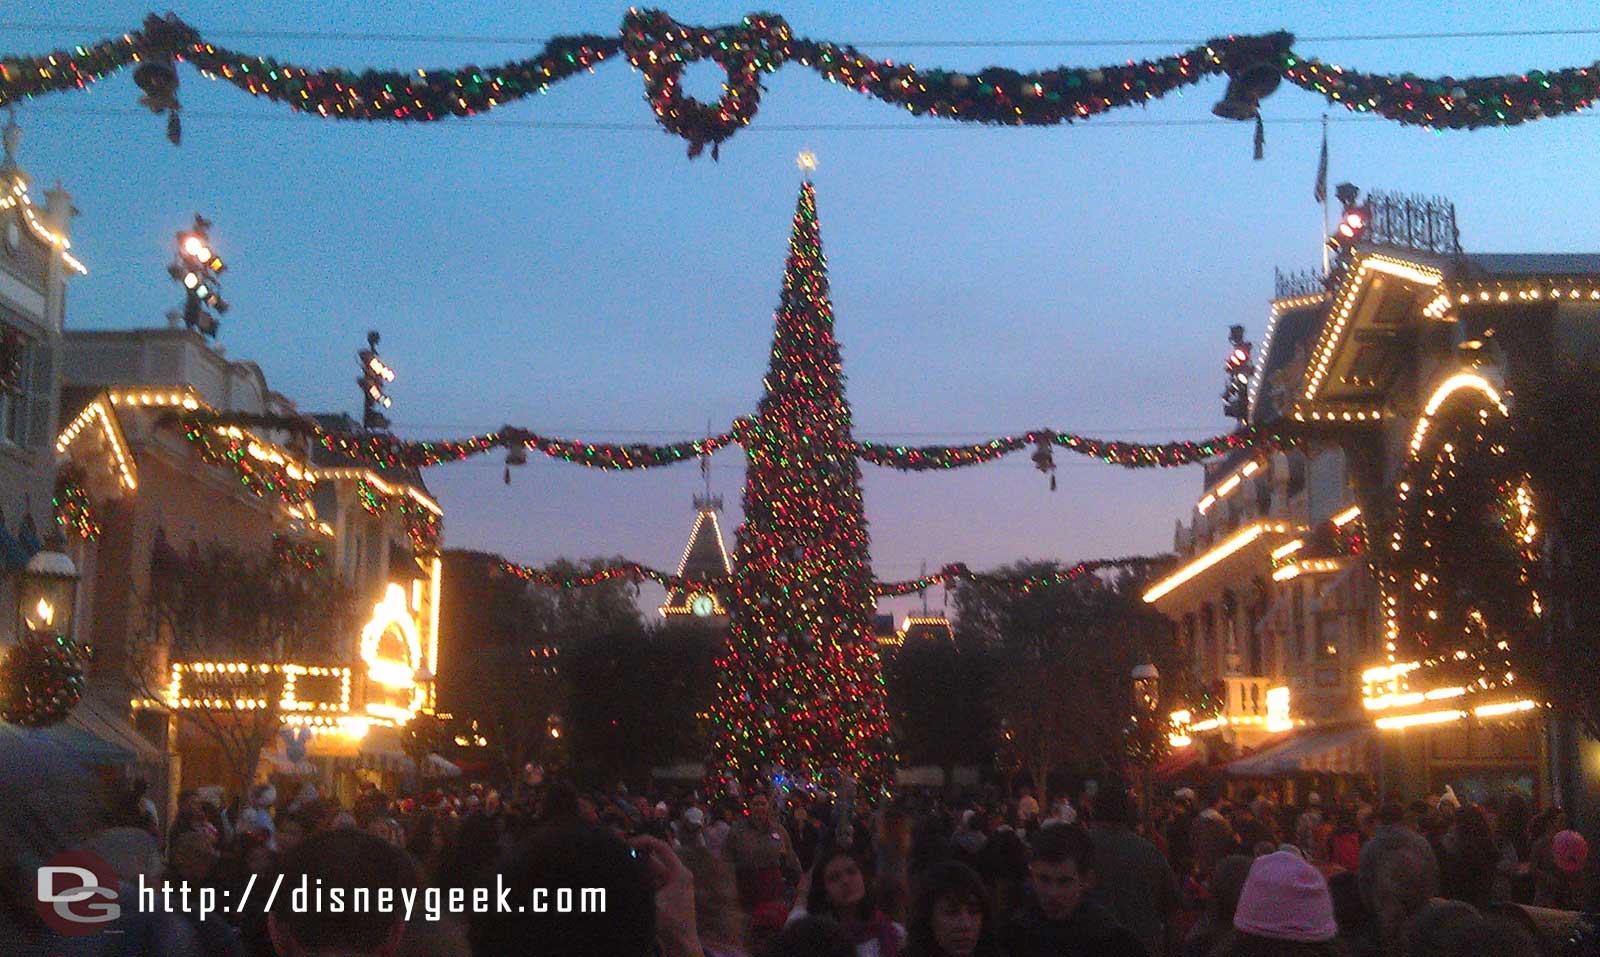 Disneyland tree lighting is the brief audio recording again this year was hoping a small show returned no such luck